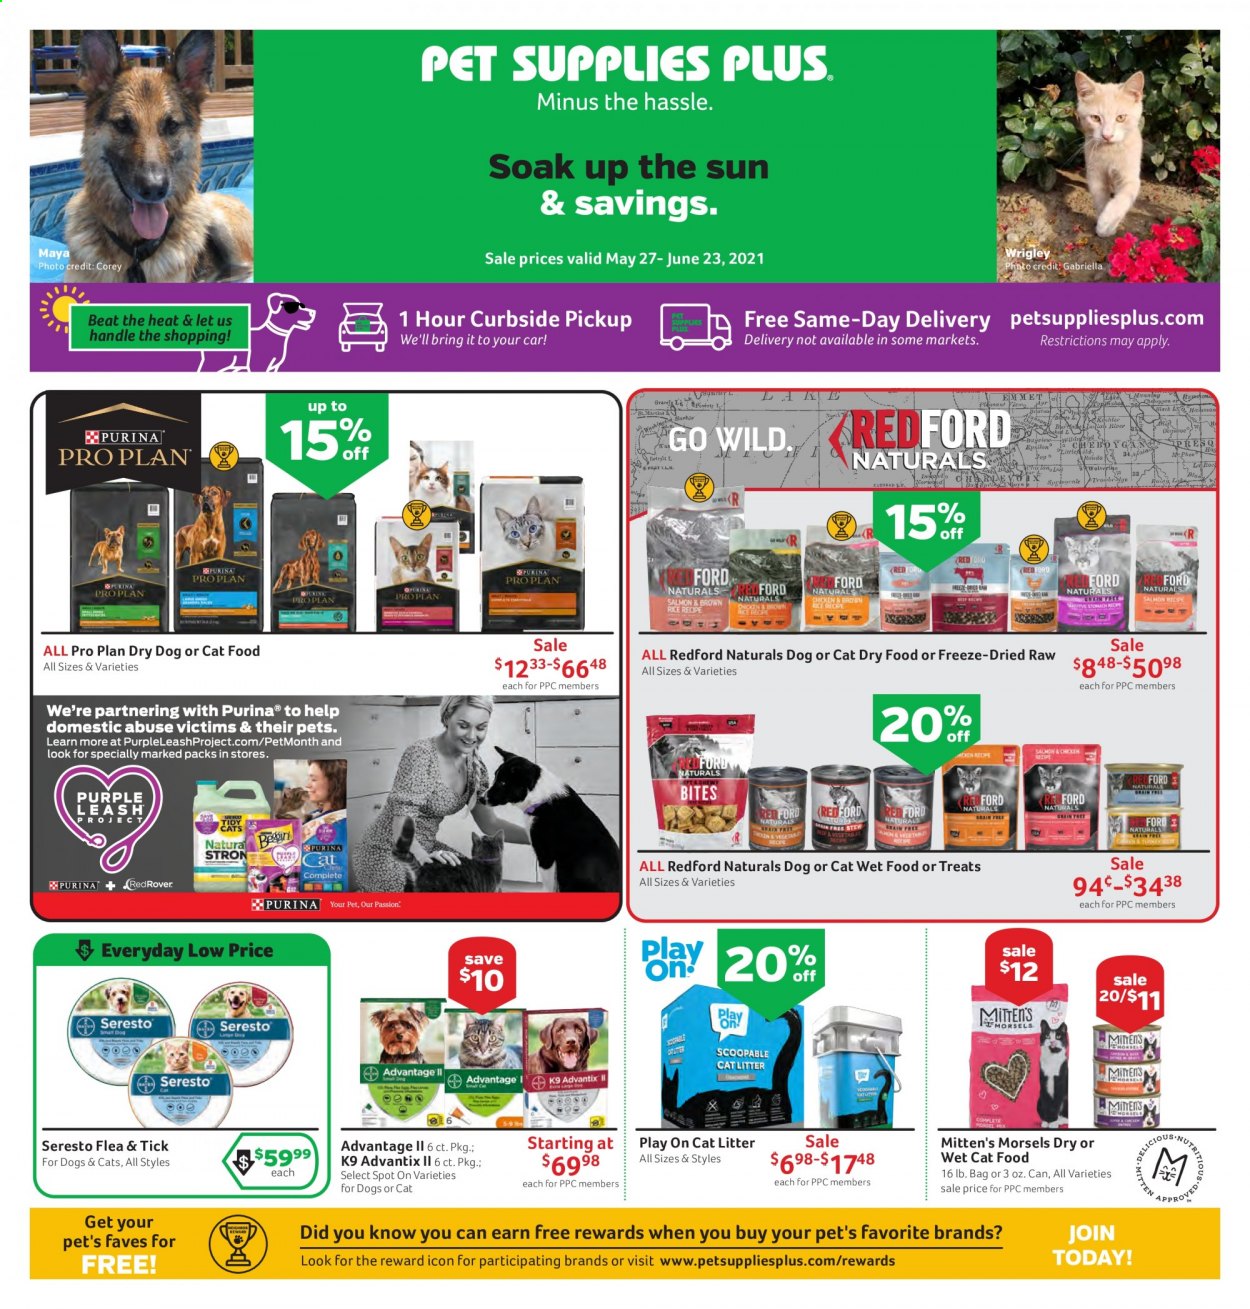 thumbnail - Pet Supplies Plus Flyer - 05/27/2021 - 06/23/2021 - Sales products - cat litter, Play On, animal food, cat food, Redford Naturals, PRO PLAN, Purina, Mitten's Morsels, wet cat food, Seresto. Page 1.